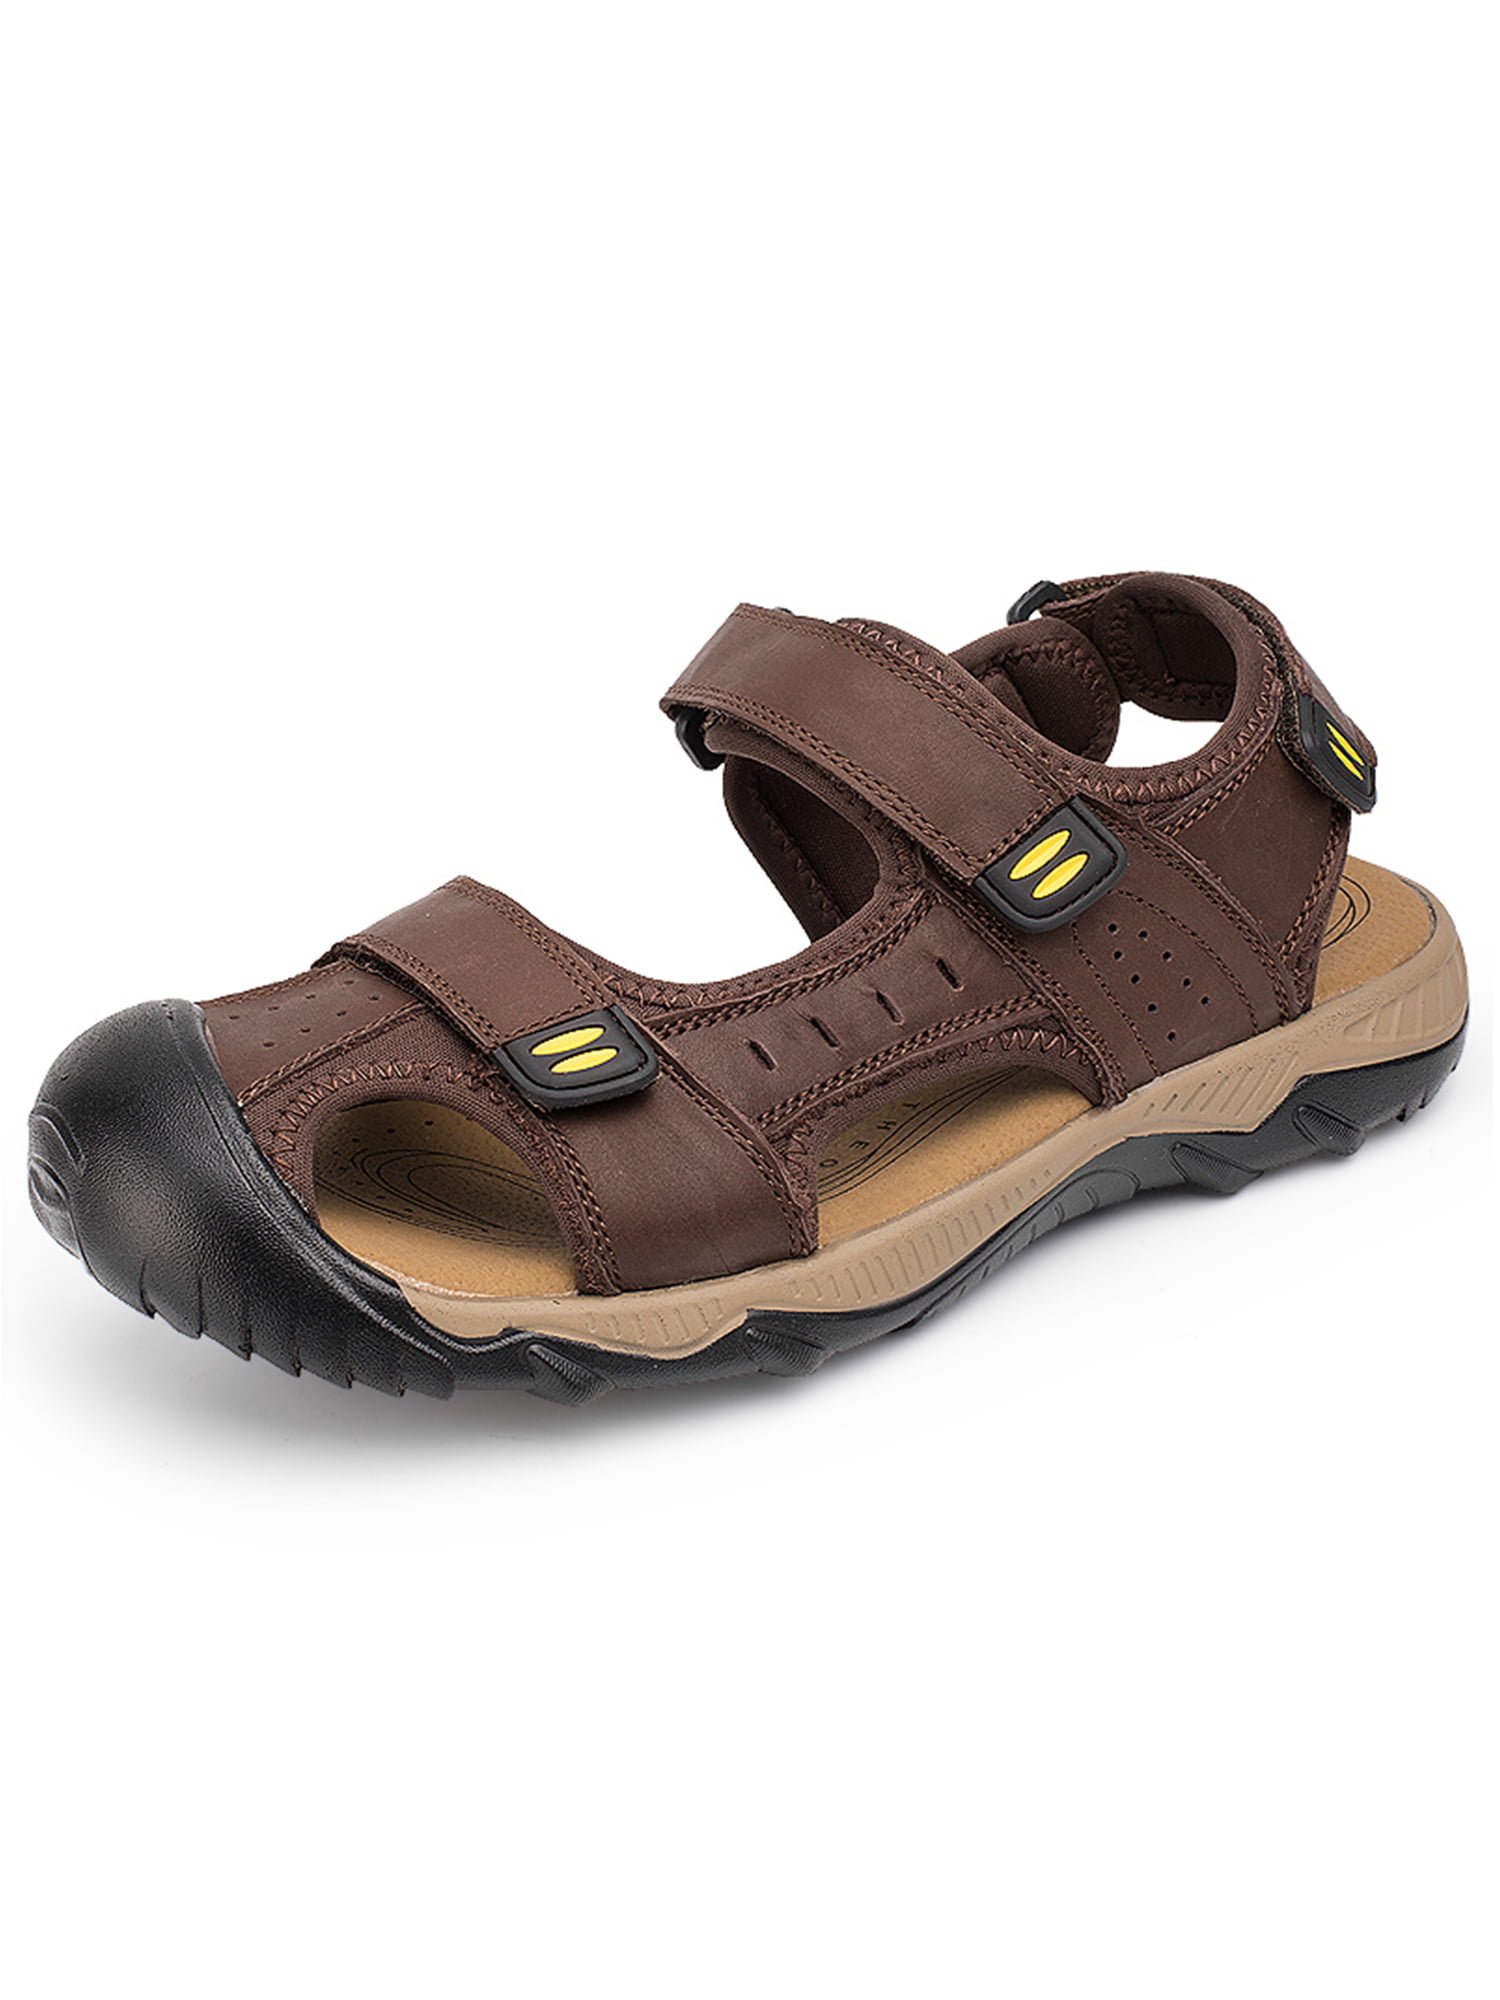 Mens Faux Leather Sandals Walking Hiking Sandals Beach Shoes Size 7 8 9 10 11 12